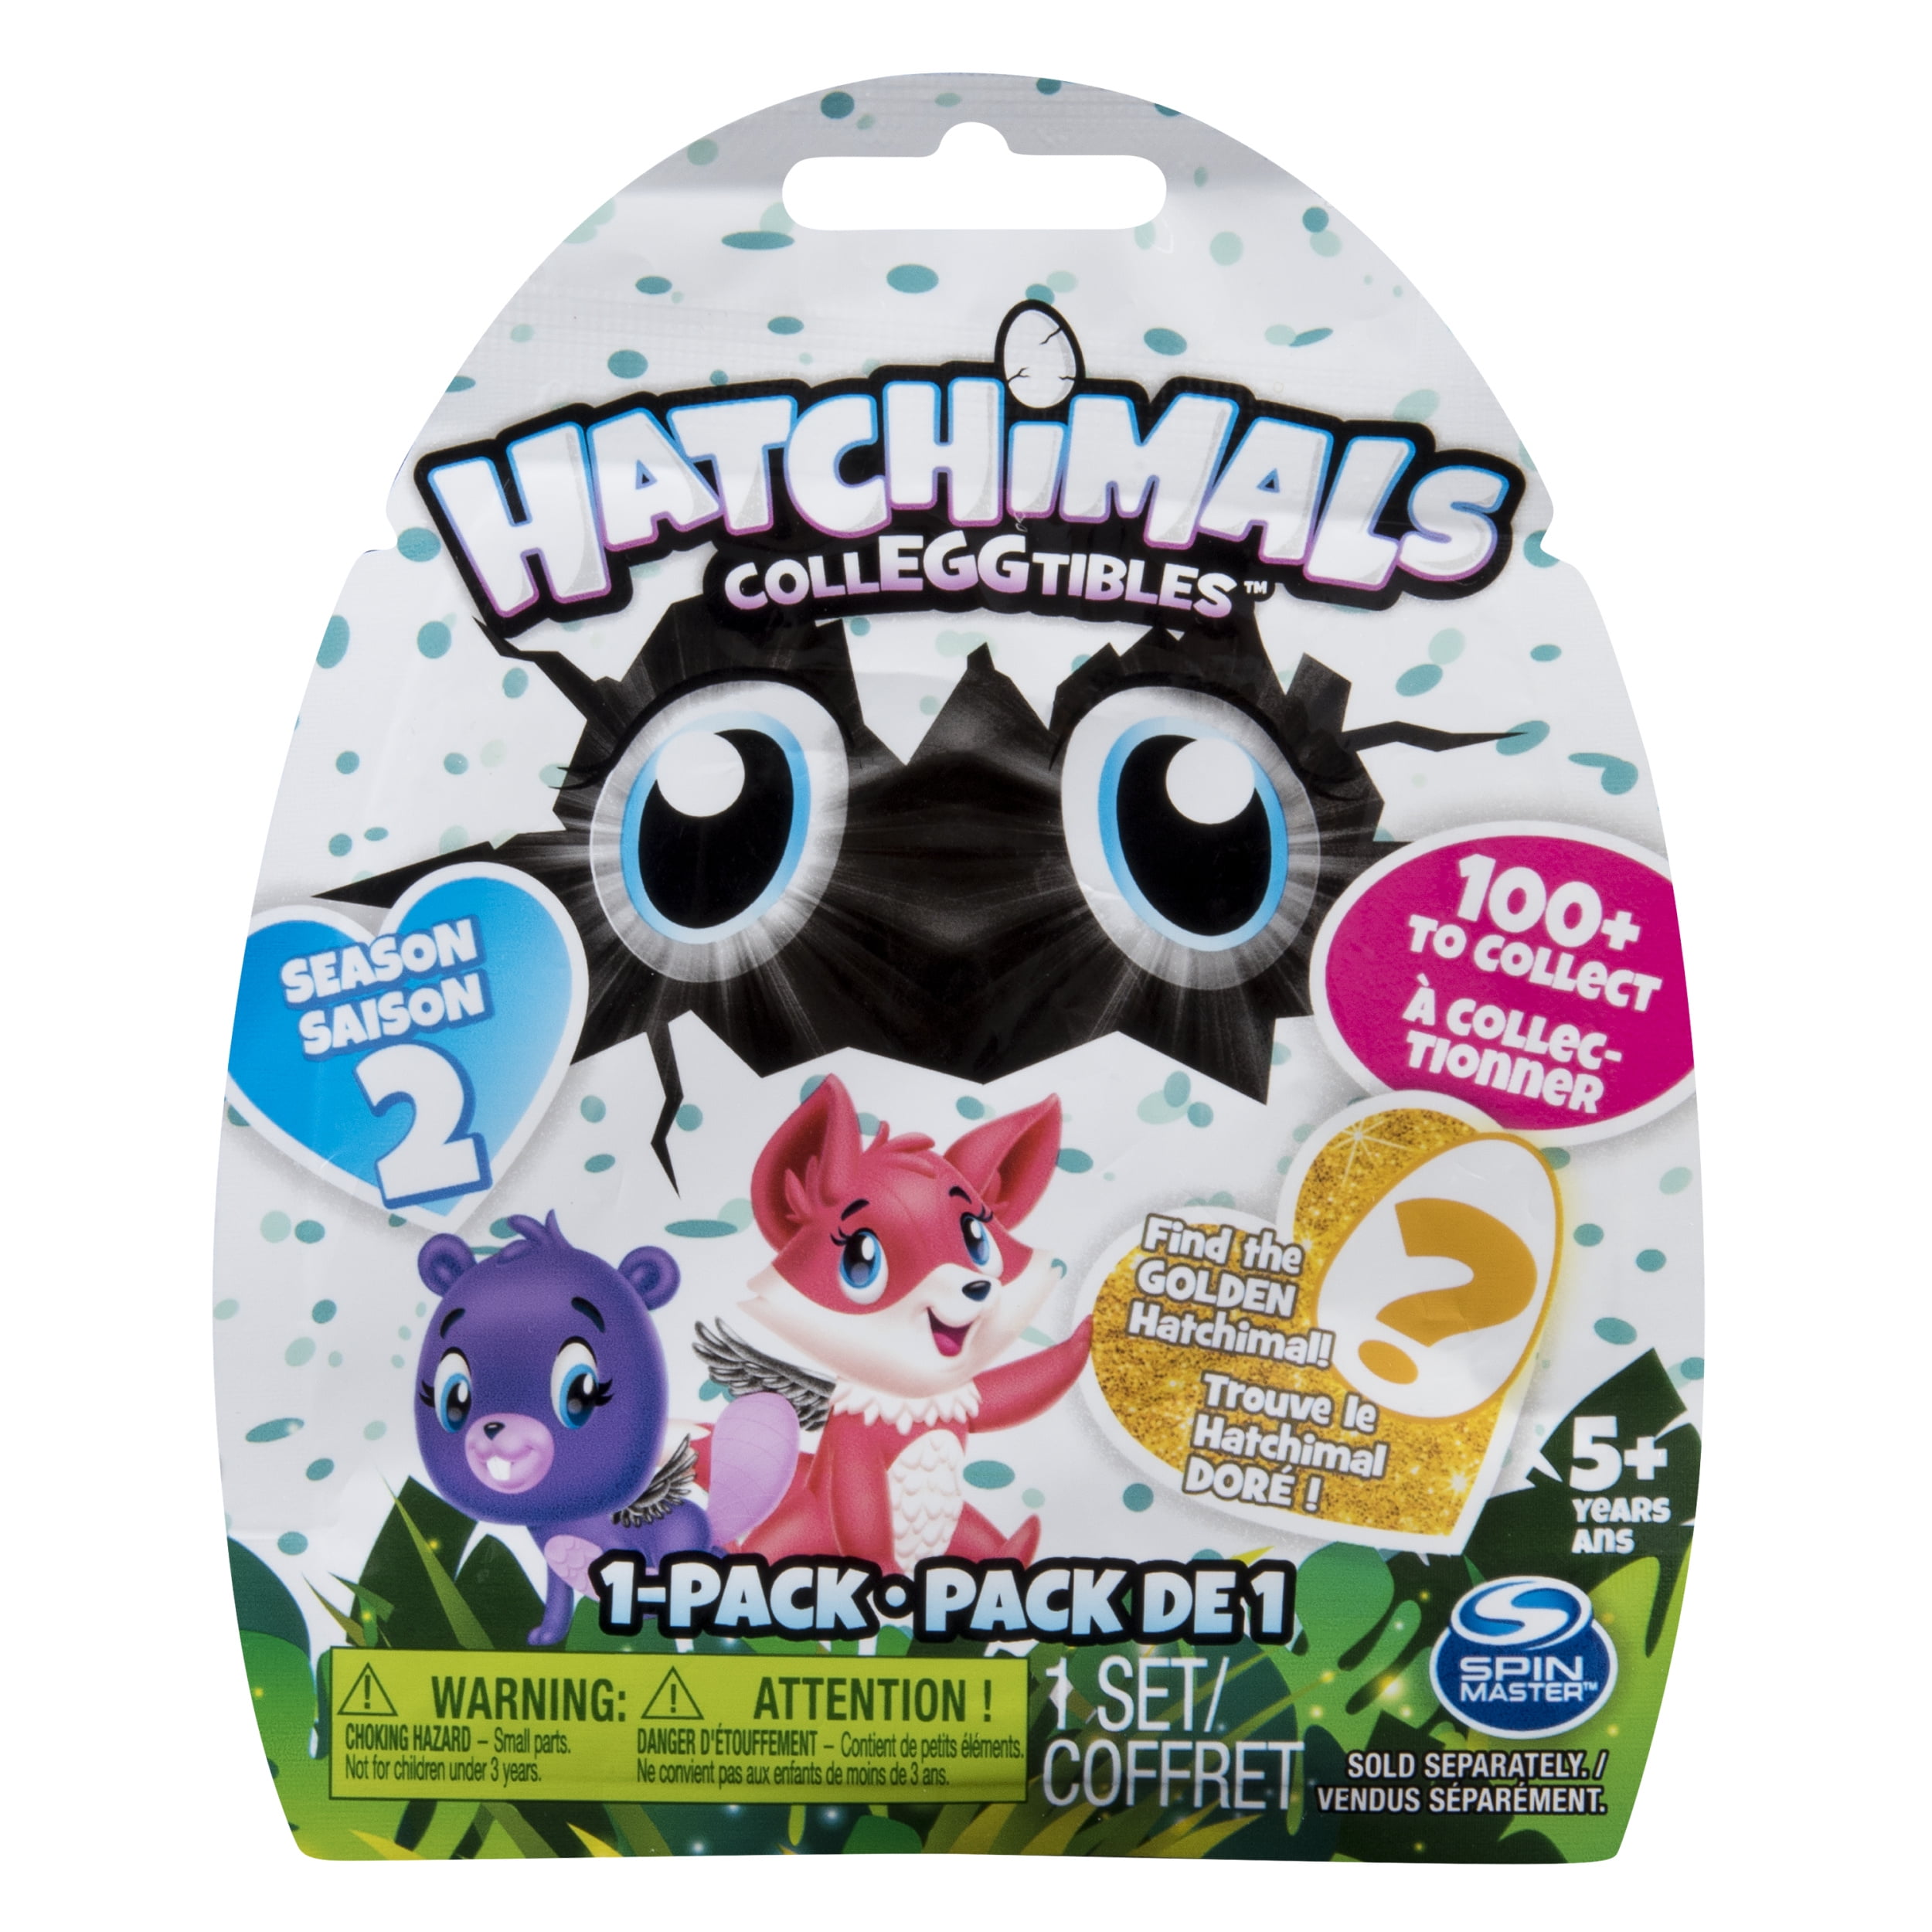 Season 2 2-Pack with 1 nest by Spin Master Hatchimals CollEGGtibles .. 